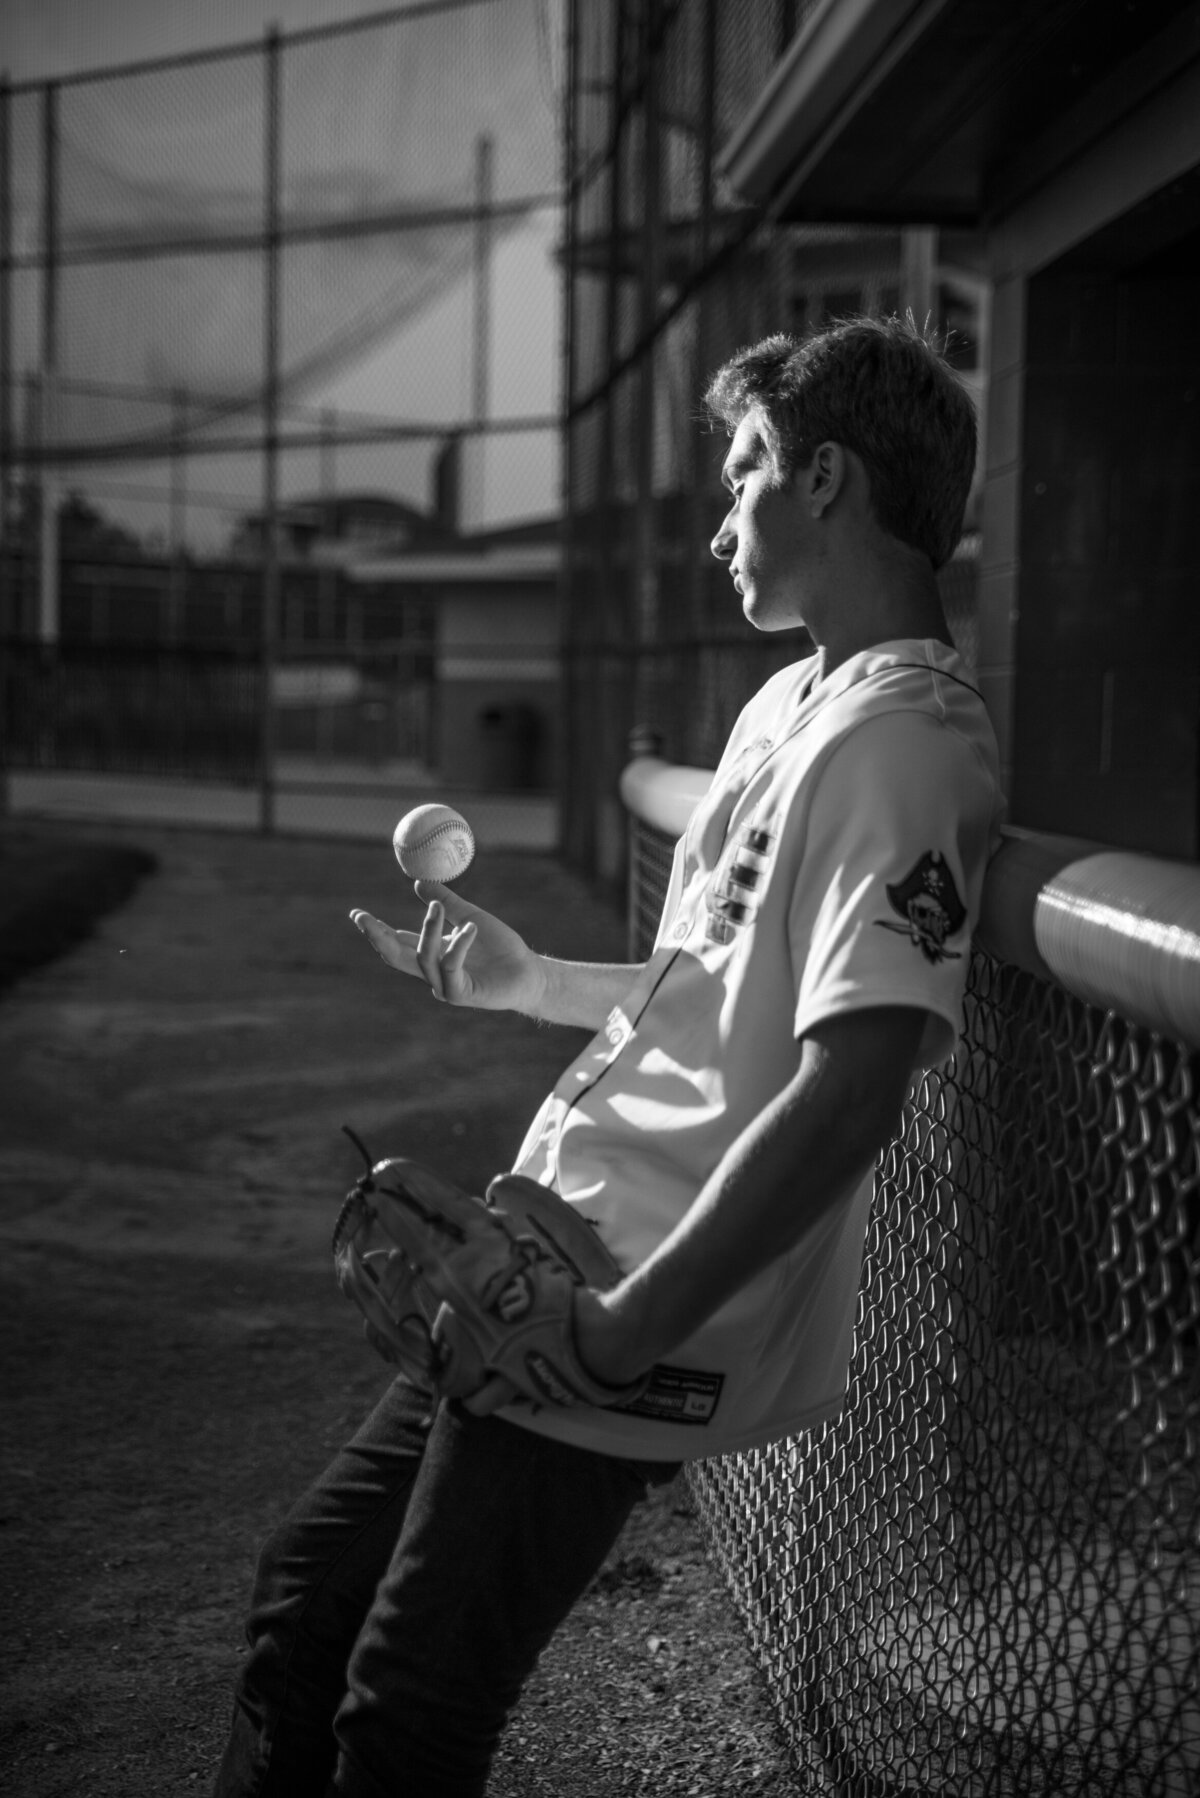 Grand-Rapids-MI-Sports-and-Hobbies-Senior-Pictures-24